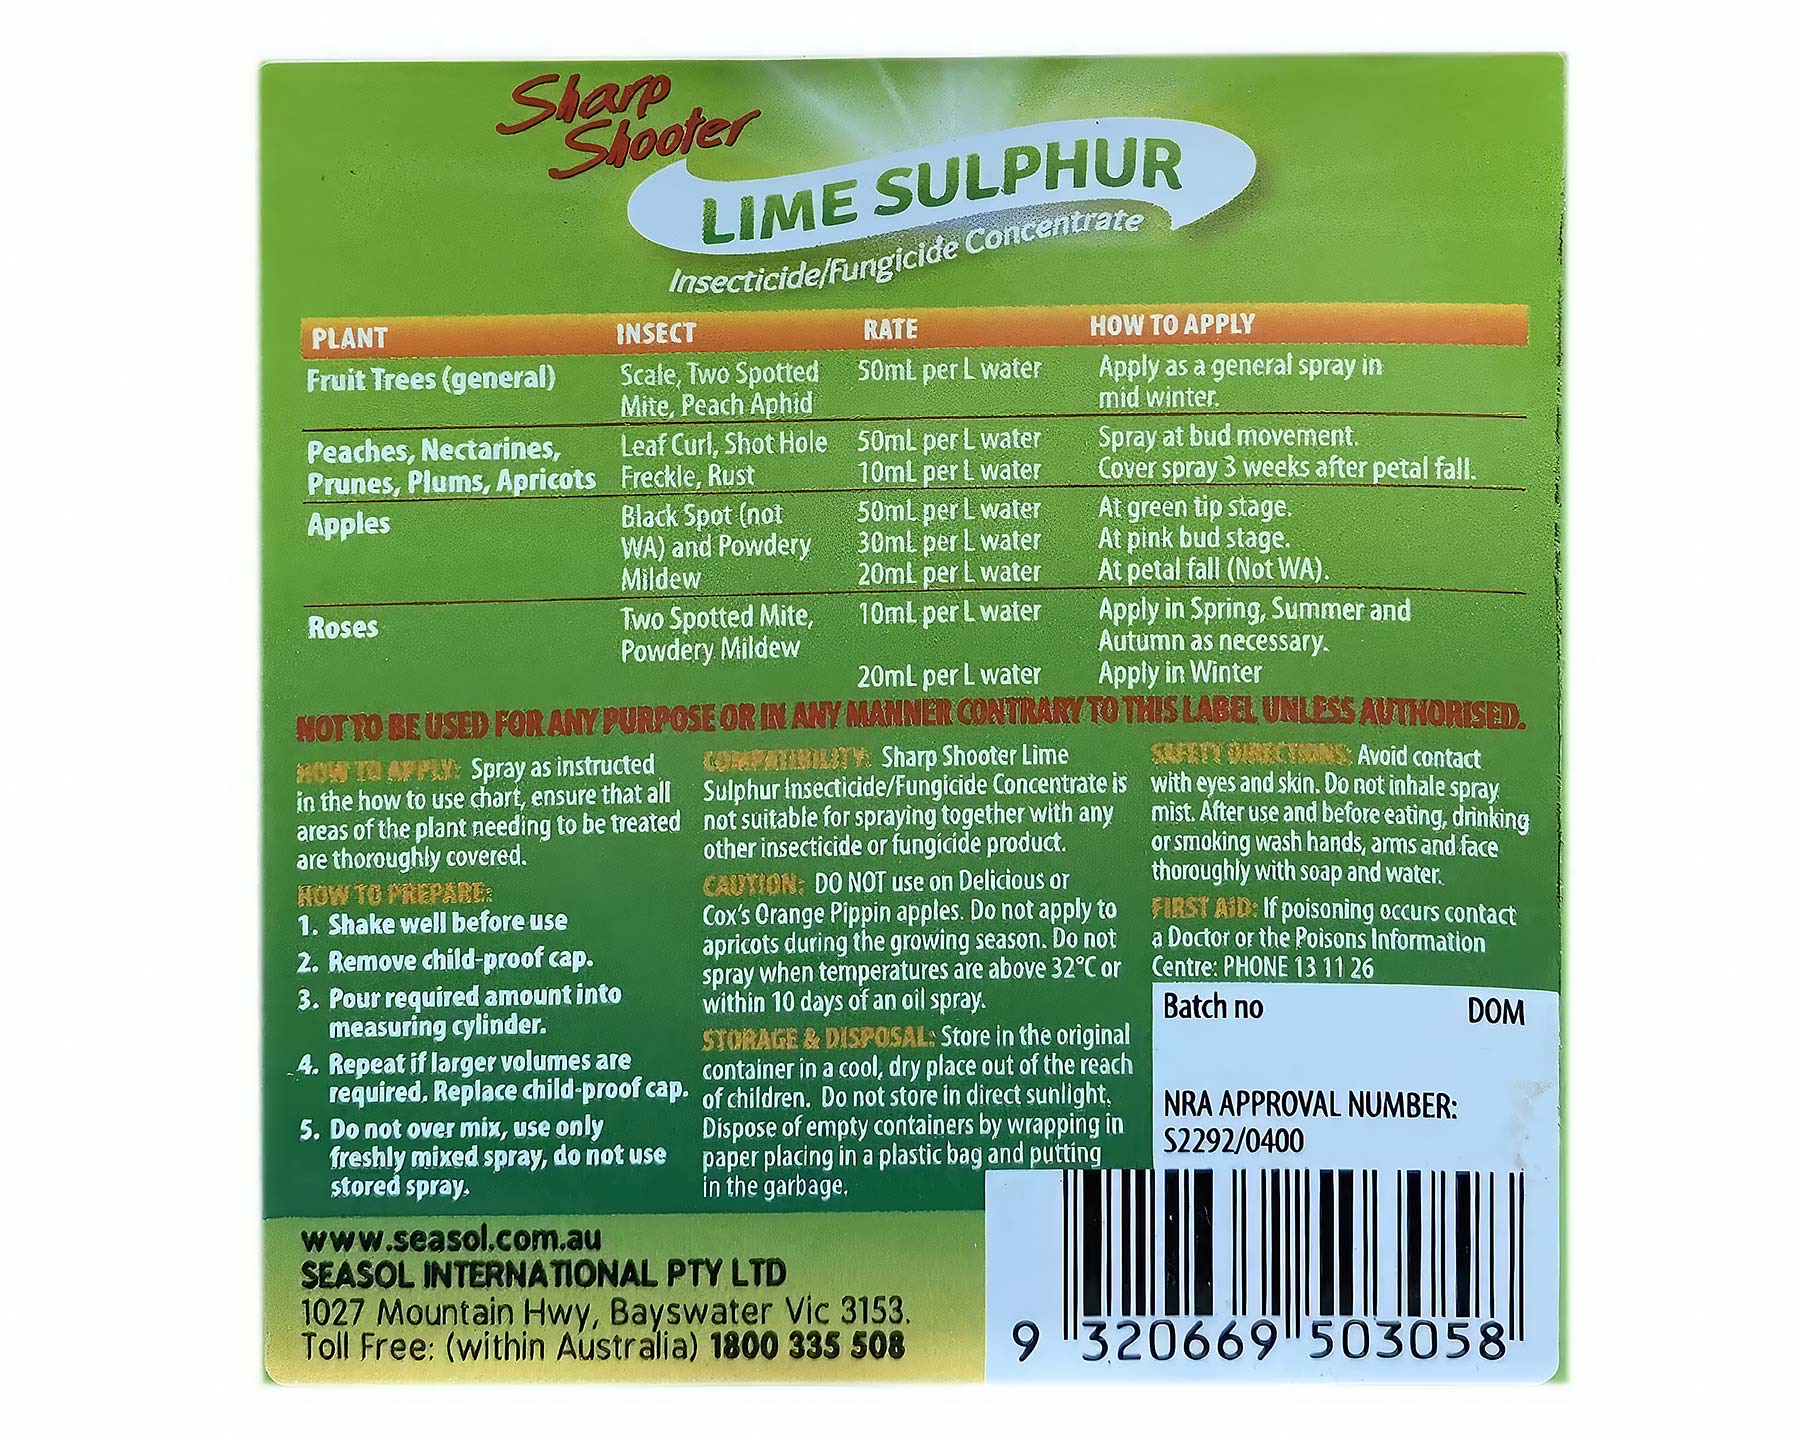 Lime Sulphur Insecticide/Fungicide Concentrate - Sharpshoote